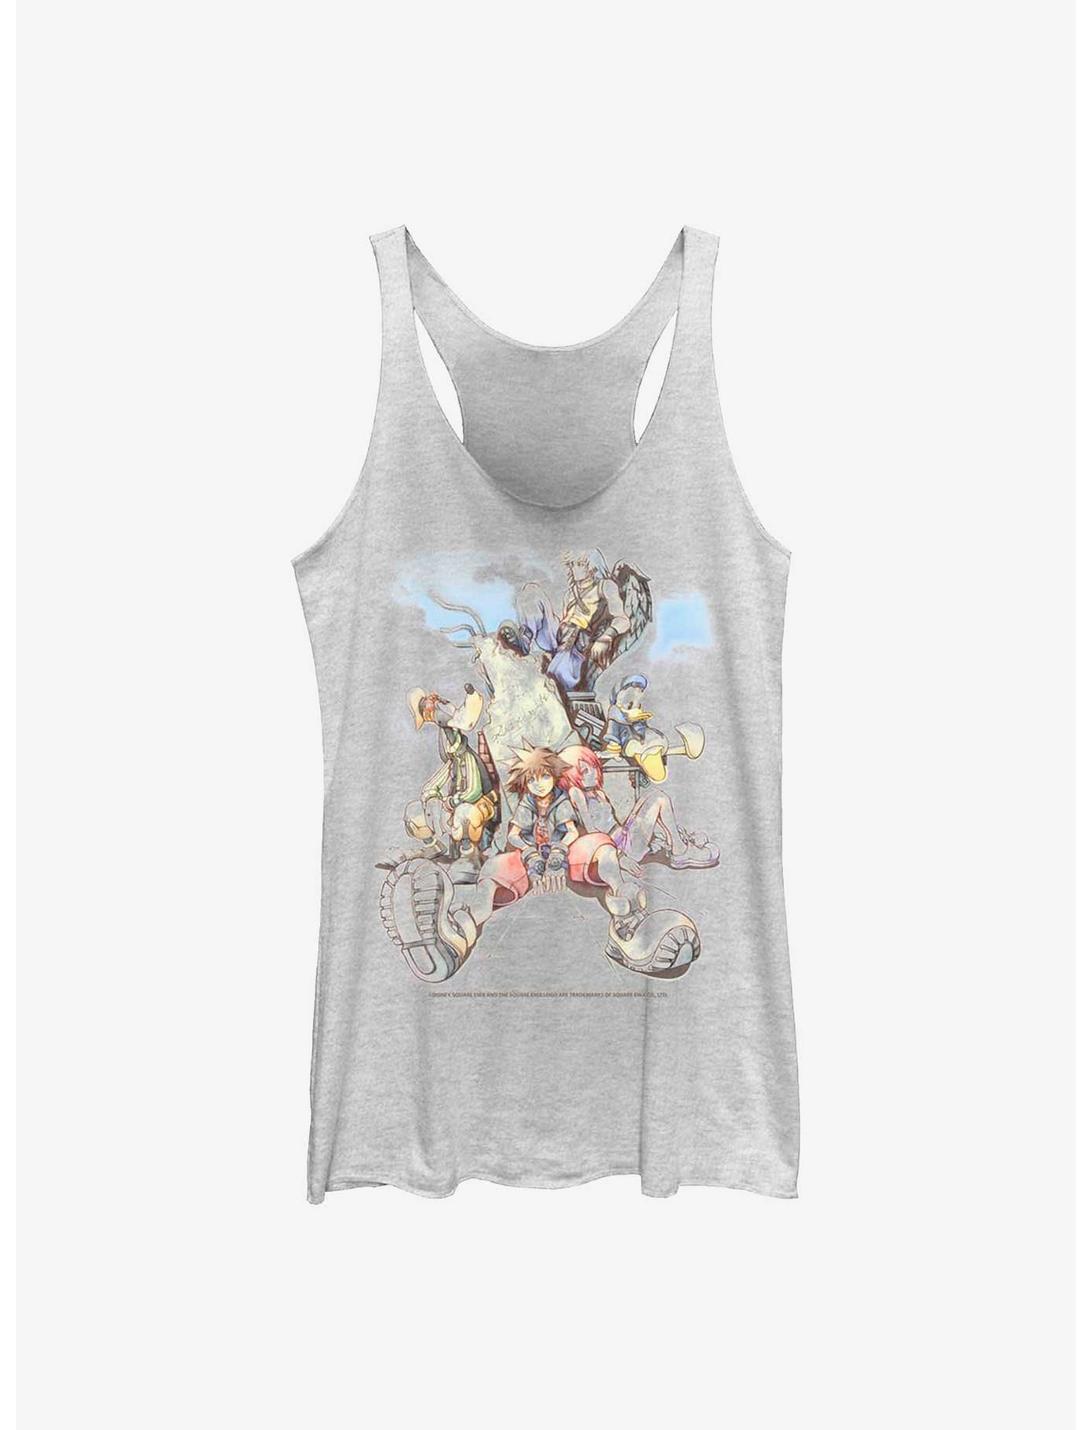 Disney Kingdom Hearts Group In The Clouds Womens Tank Top, WHITE HTR, hi-res